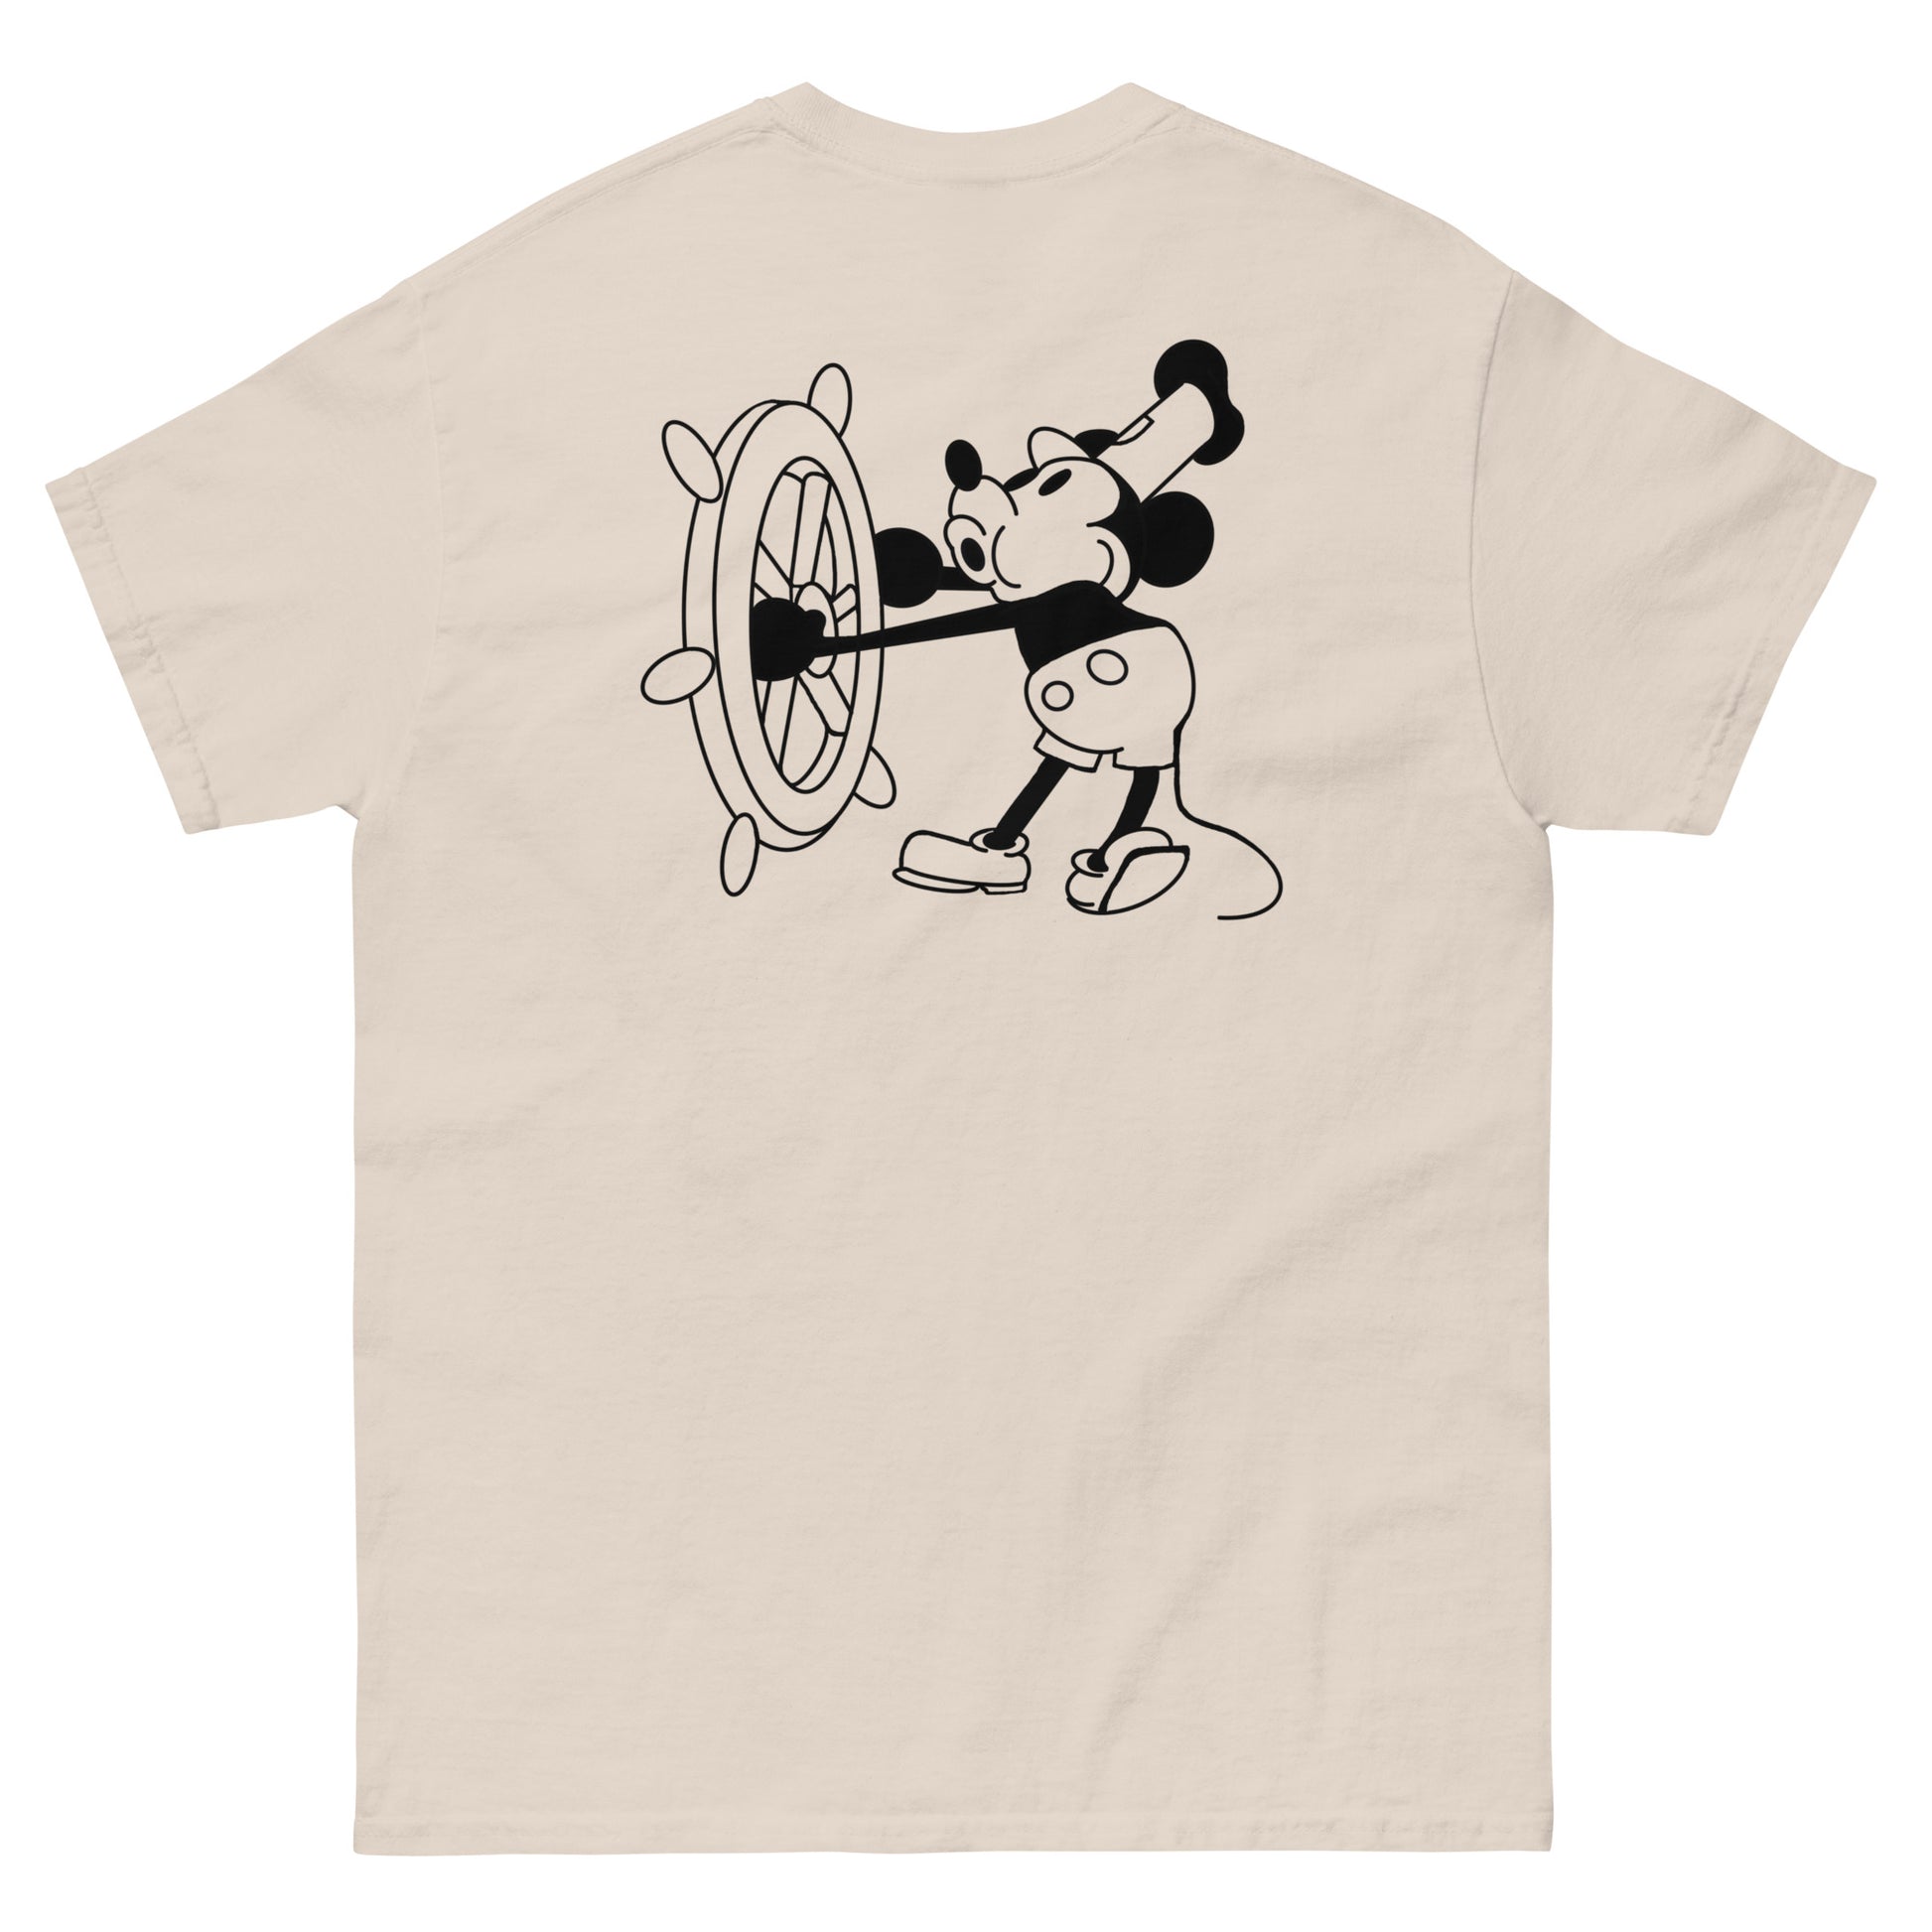 Good Day Steamboat Gildan classic tee - Ghostly Tails